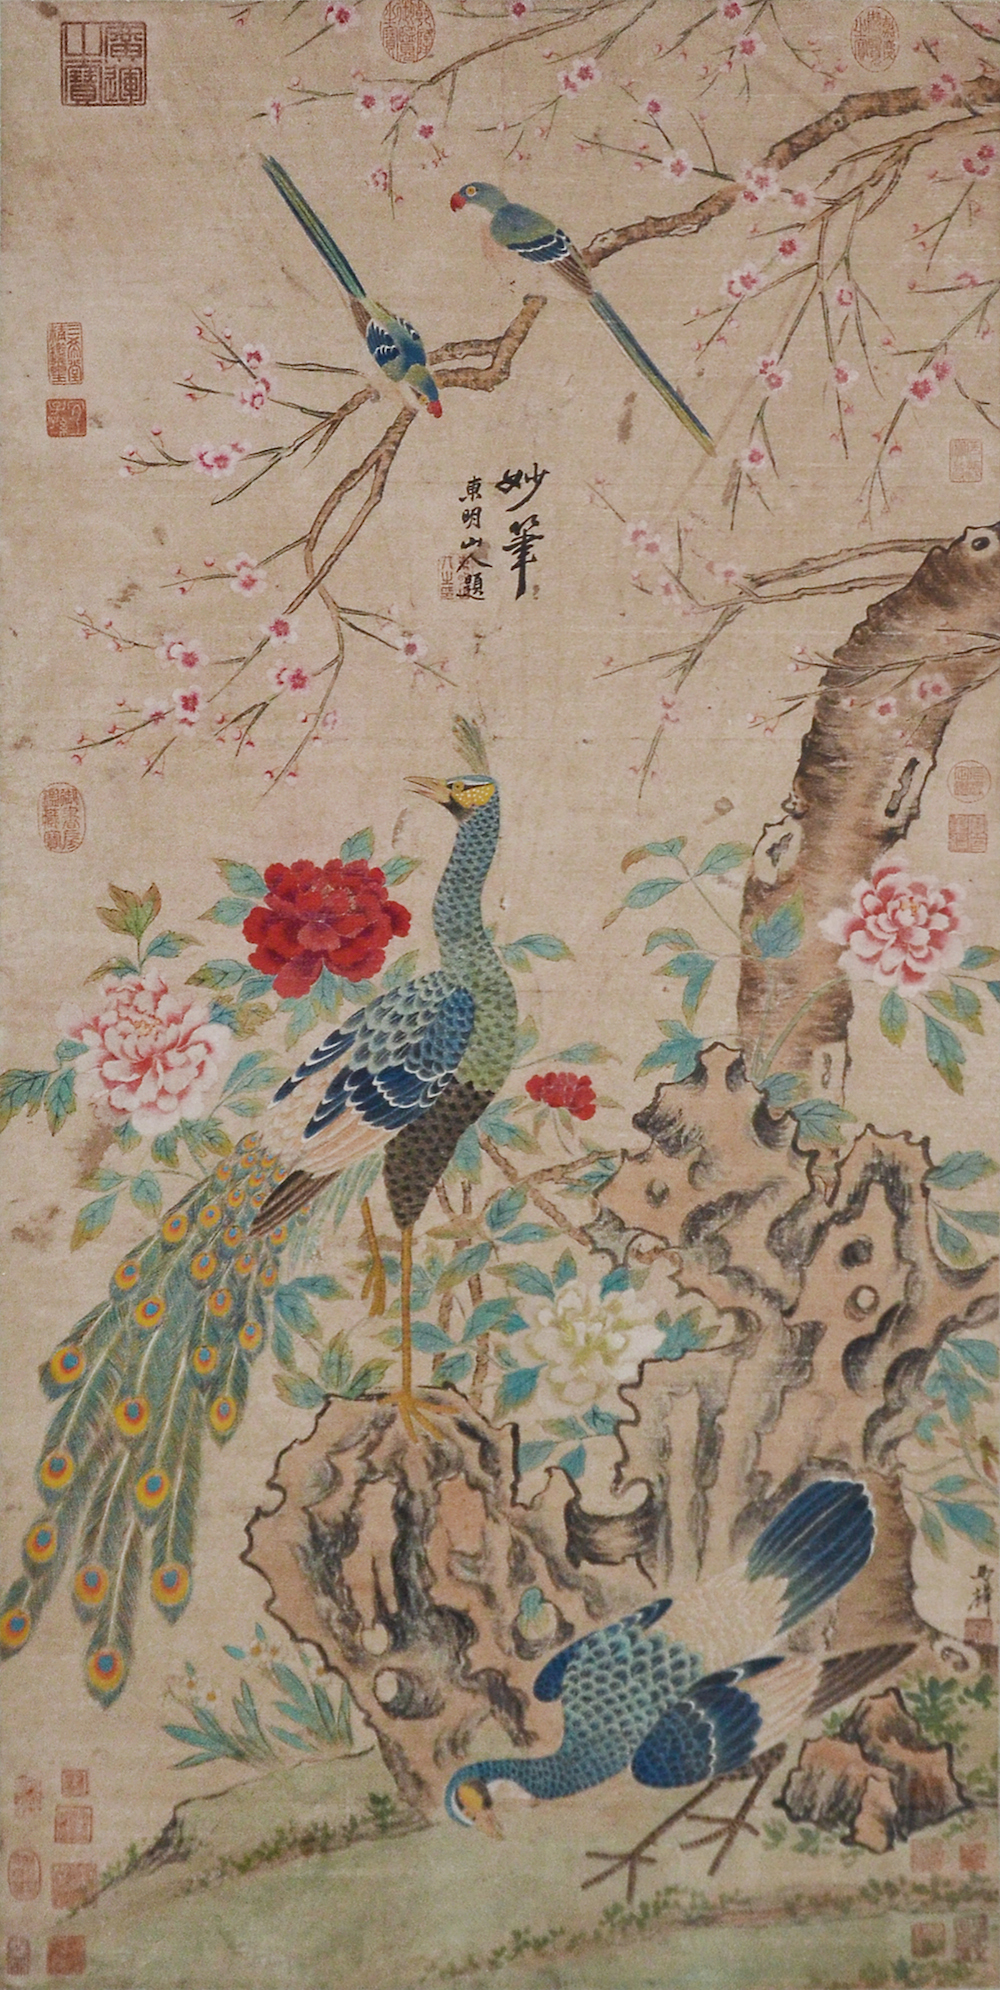 Spring Time, a Southern Song Dynasty painting by painter Ma Lin with parrots, peacocks and cherry blossoms. Lot 37. $1,000,000 - $1,500,000